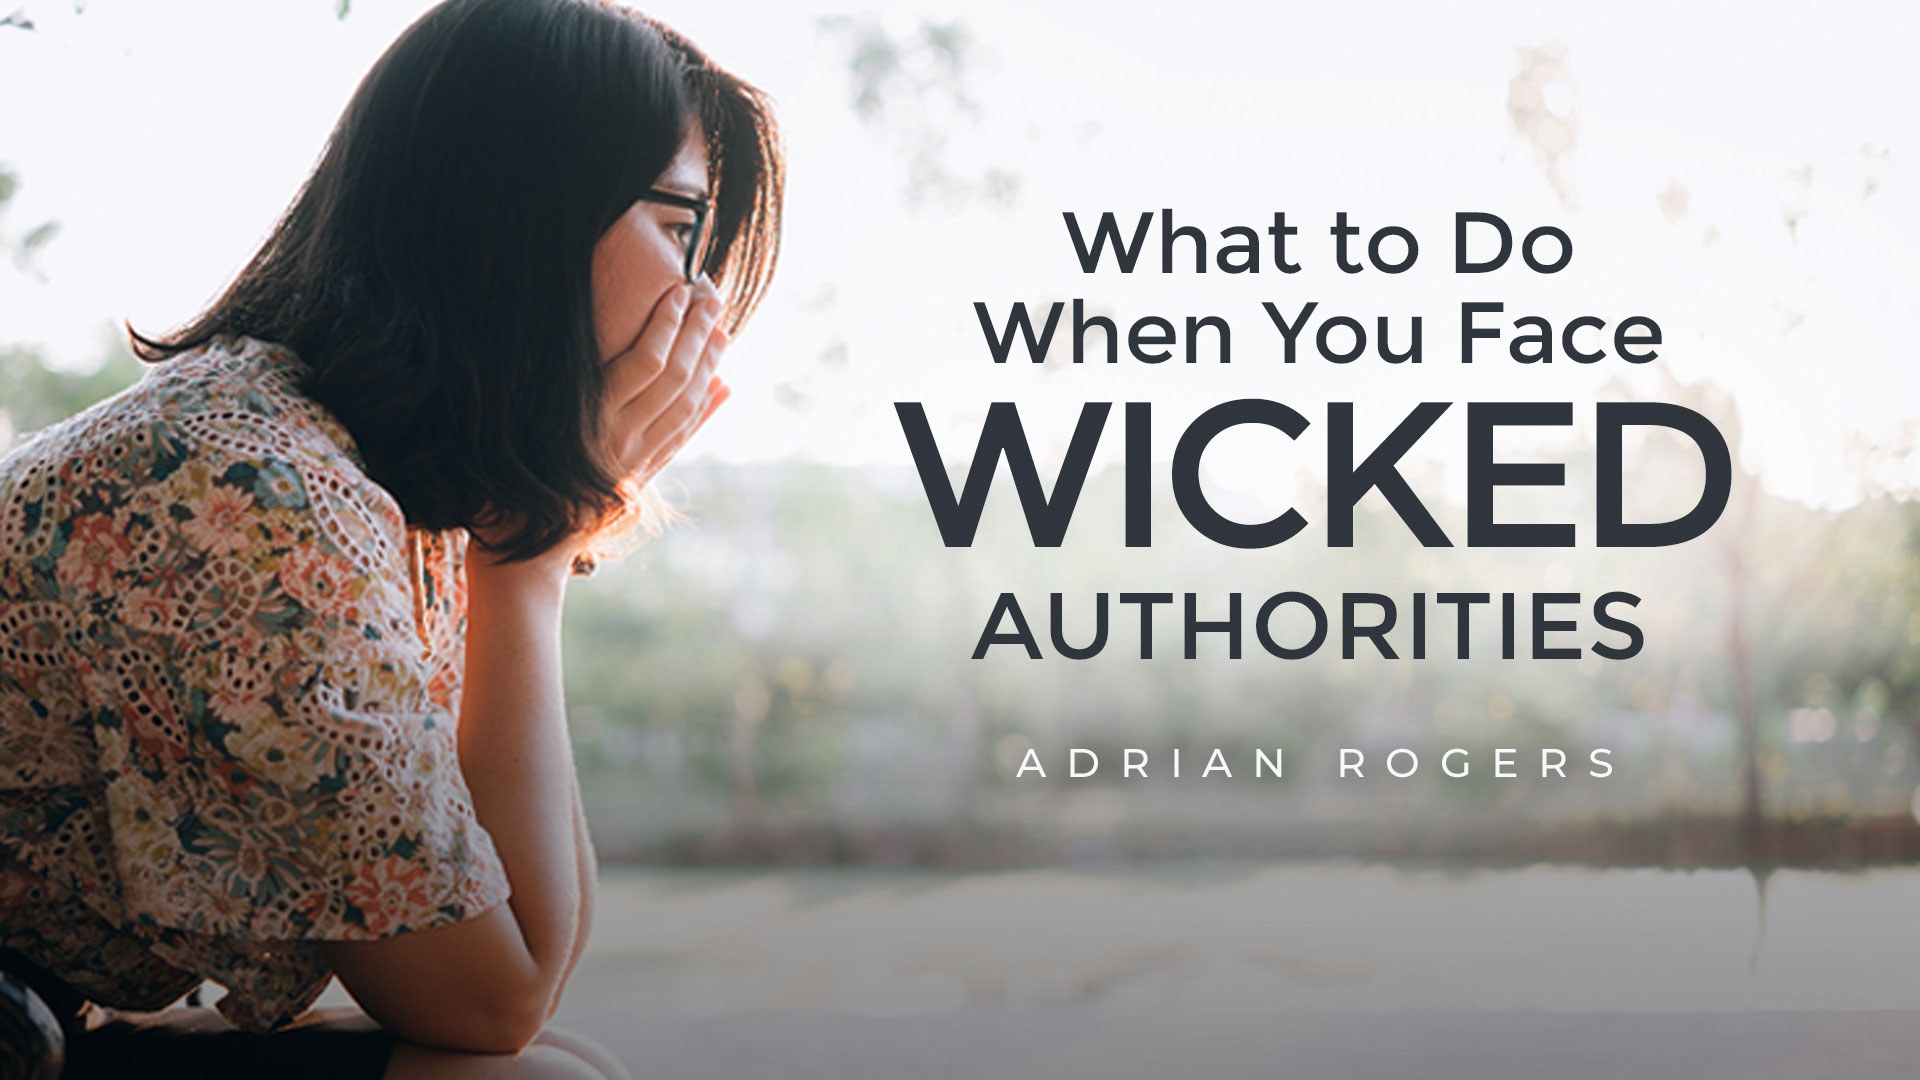 What to do When You Face Wicked Authorities 1920x1080